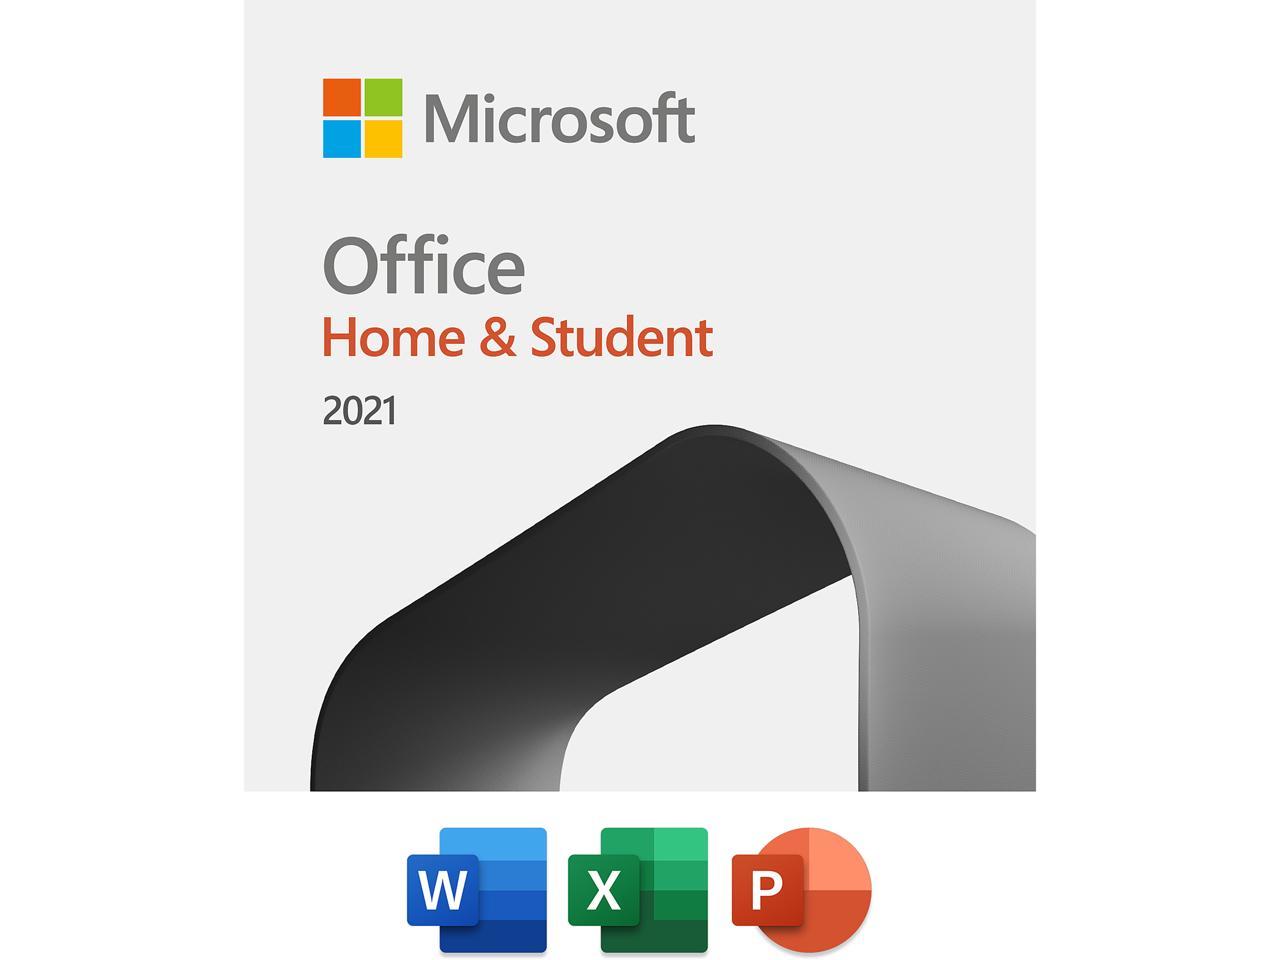 Microsoft Office Home & Student 2021 (Digital Download) $89.99